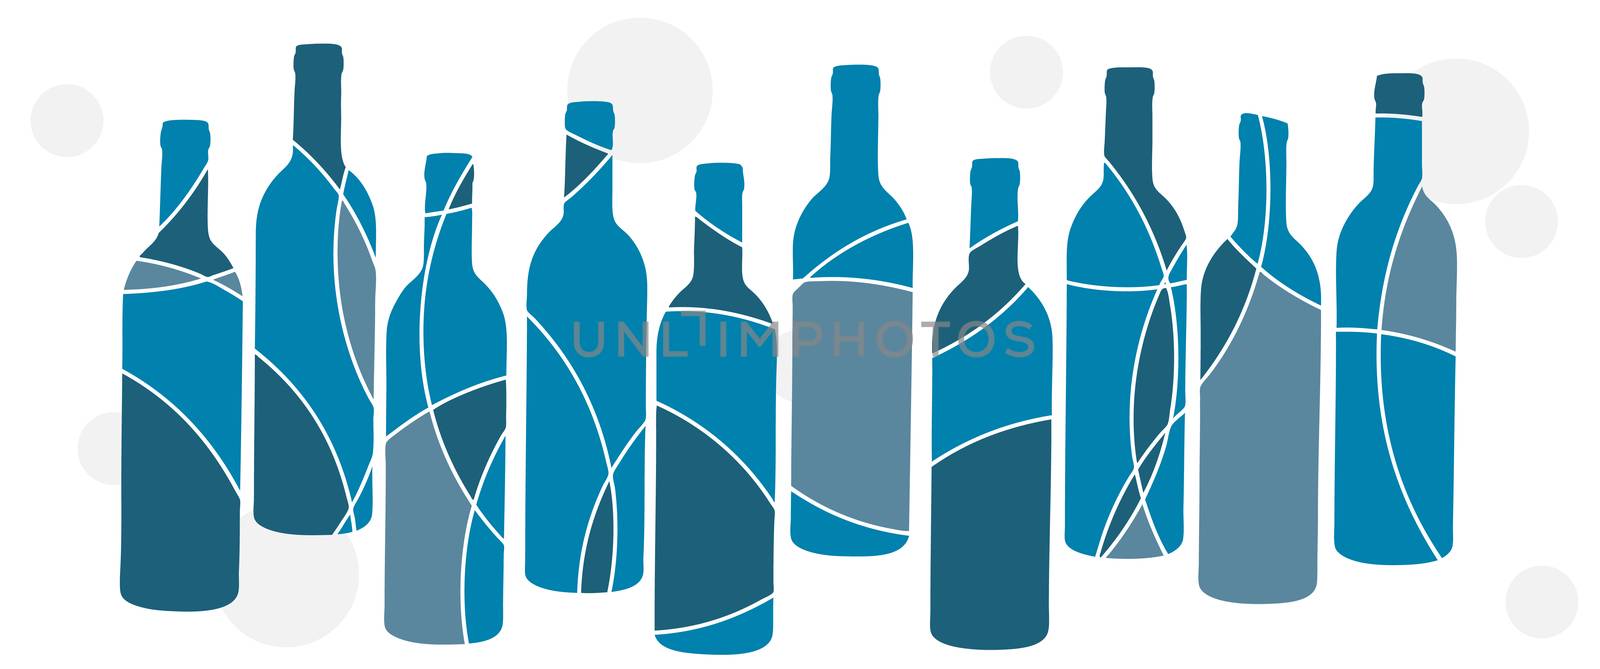 An abstract blue wine bottle illustration